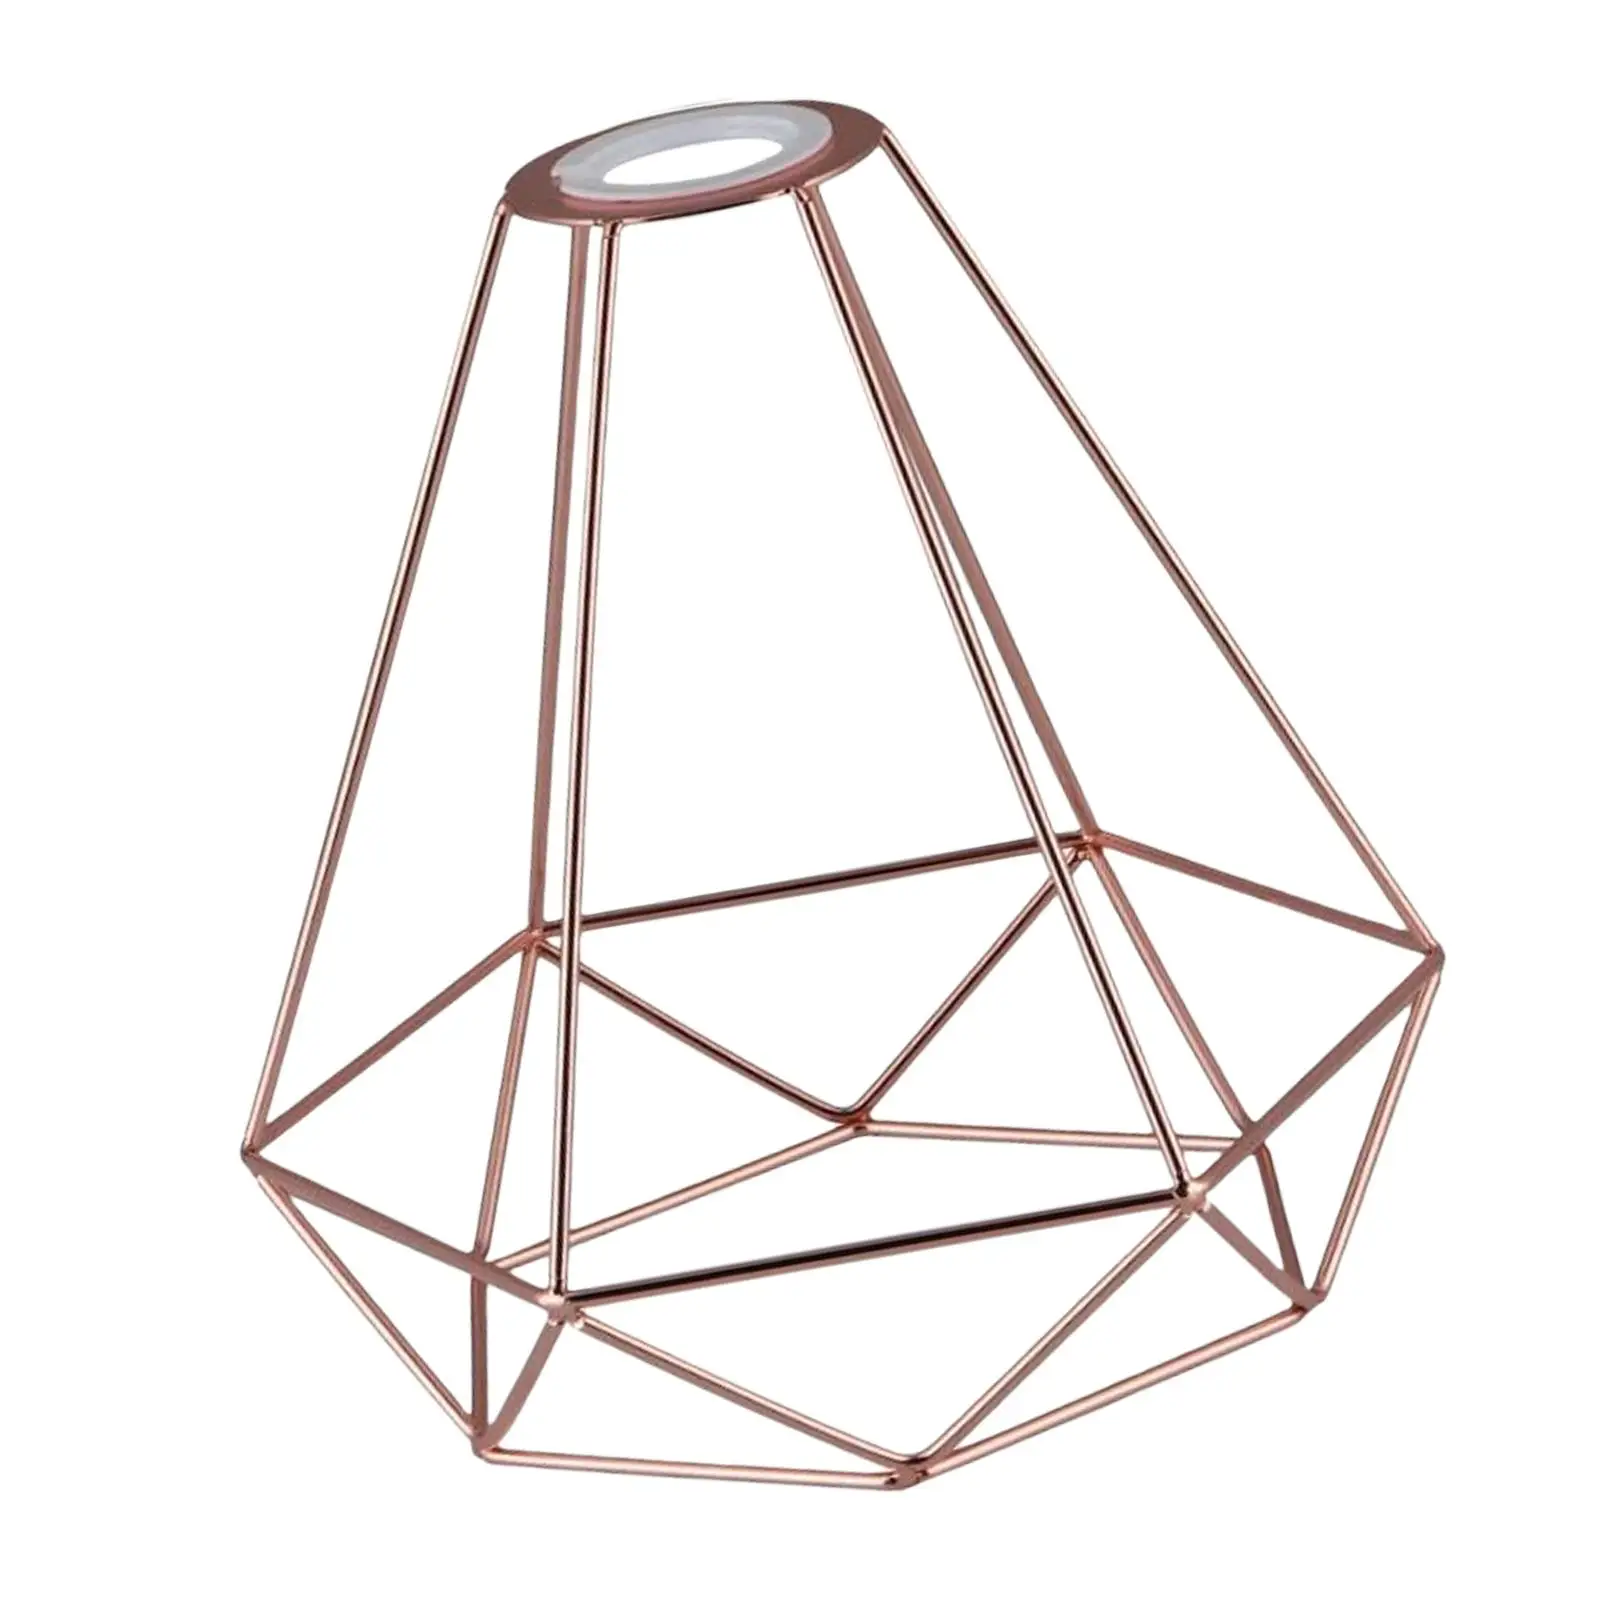 Pendant Lampshade Diamond Shape Hanging Chandelier Practical for Ceiling